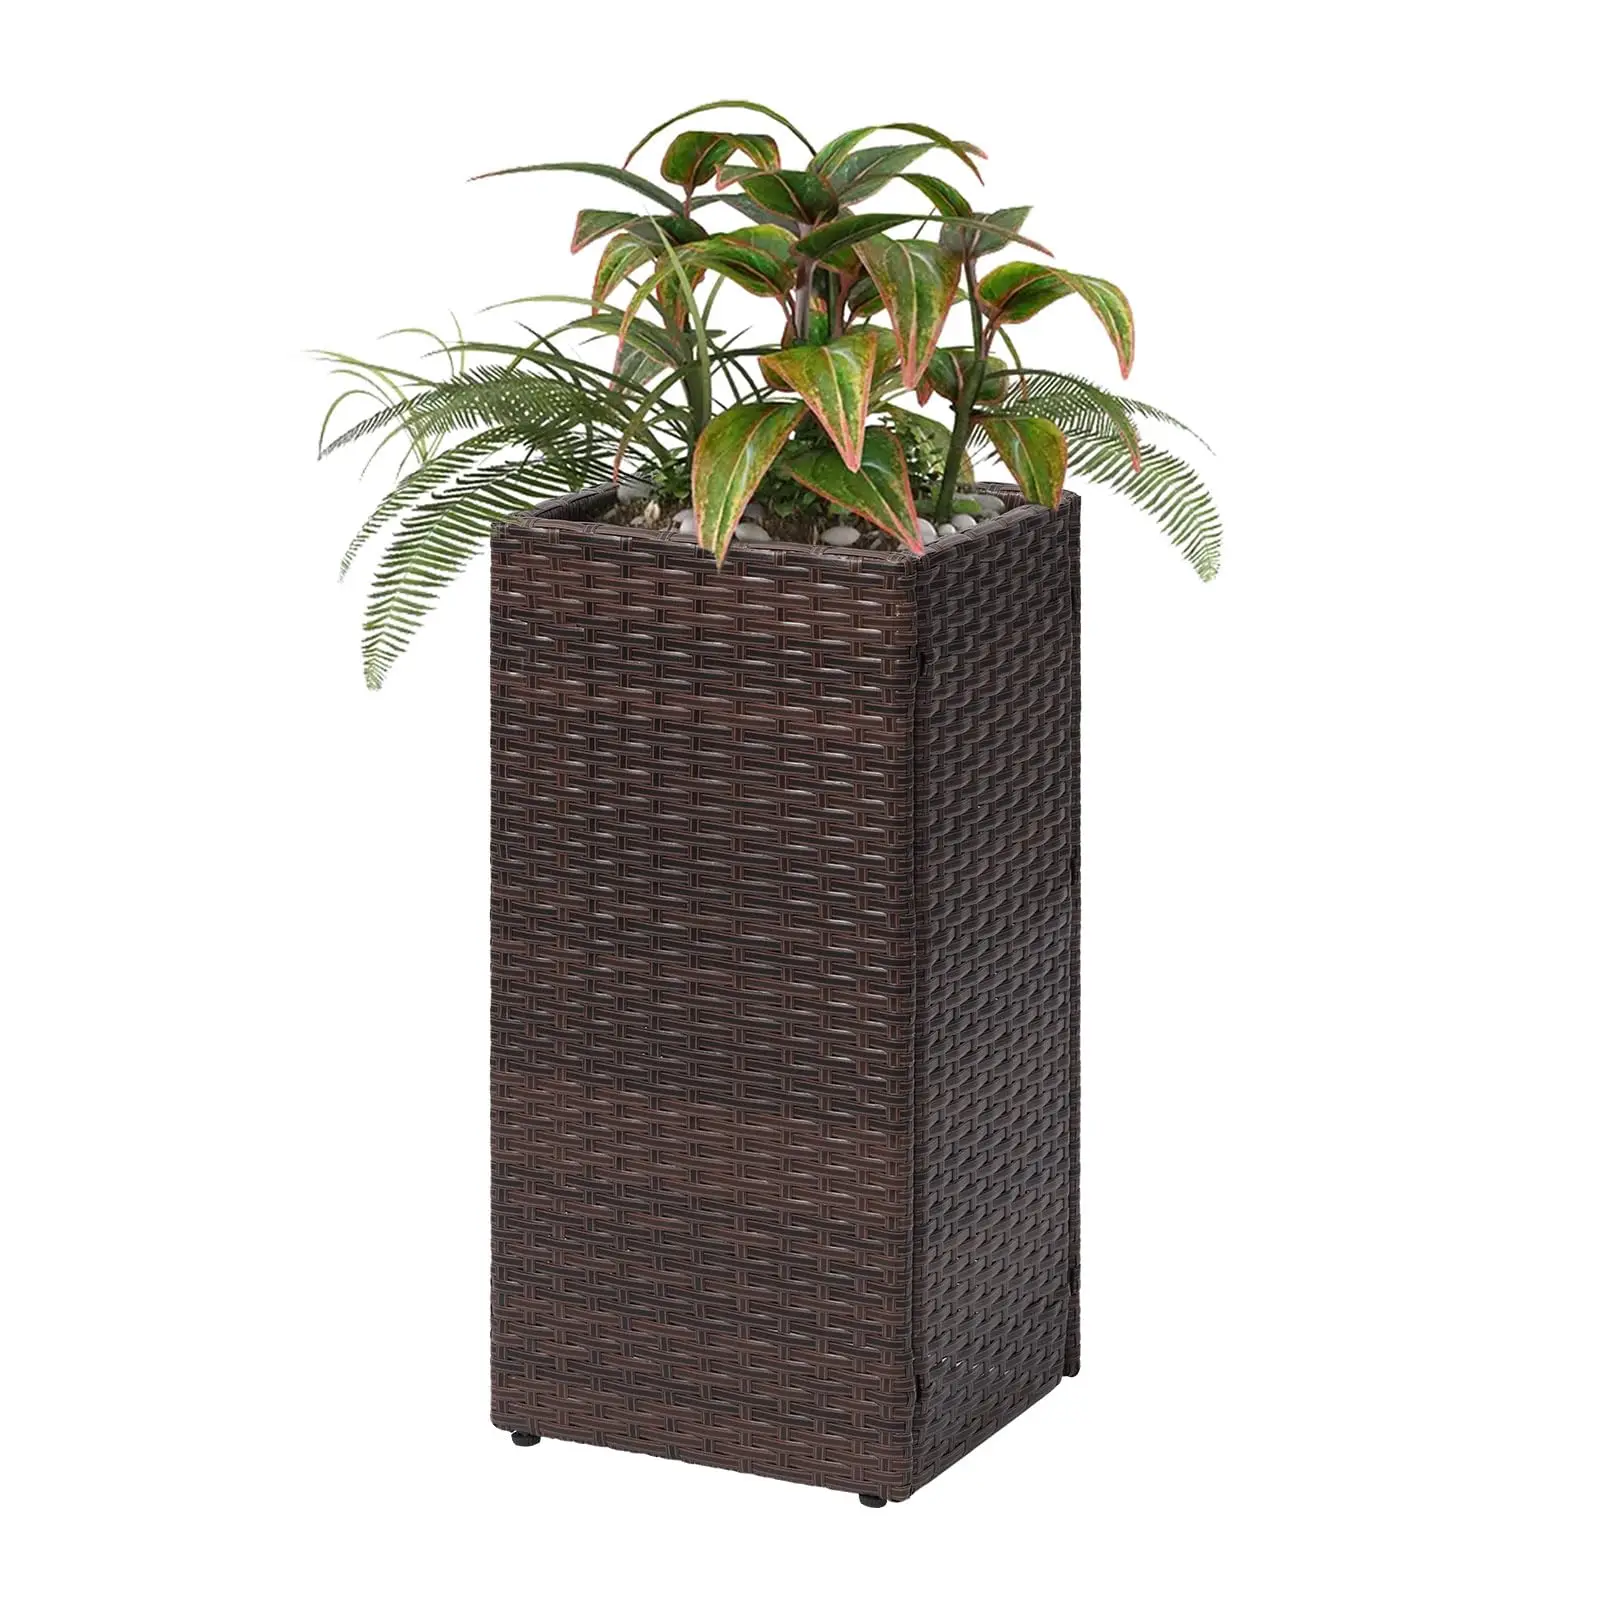 

Outdoor Plant Tall Planter Rattan Modern Tall Square Planter Box with Removable Liner Indoor Outdoor (12" x 12" x 24")